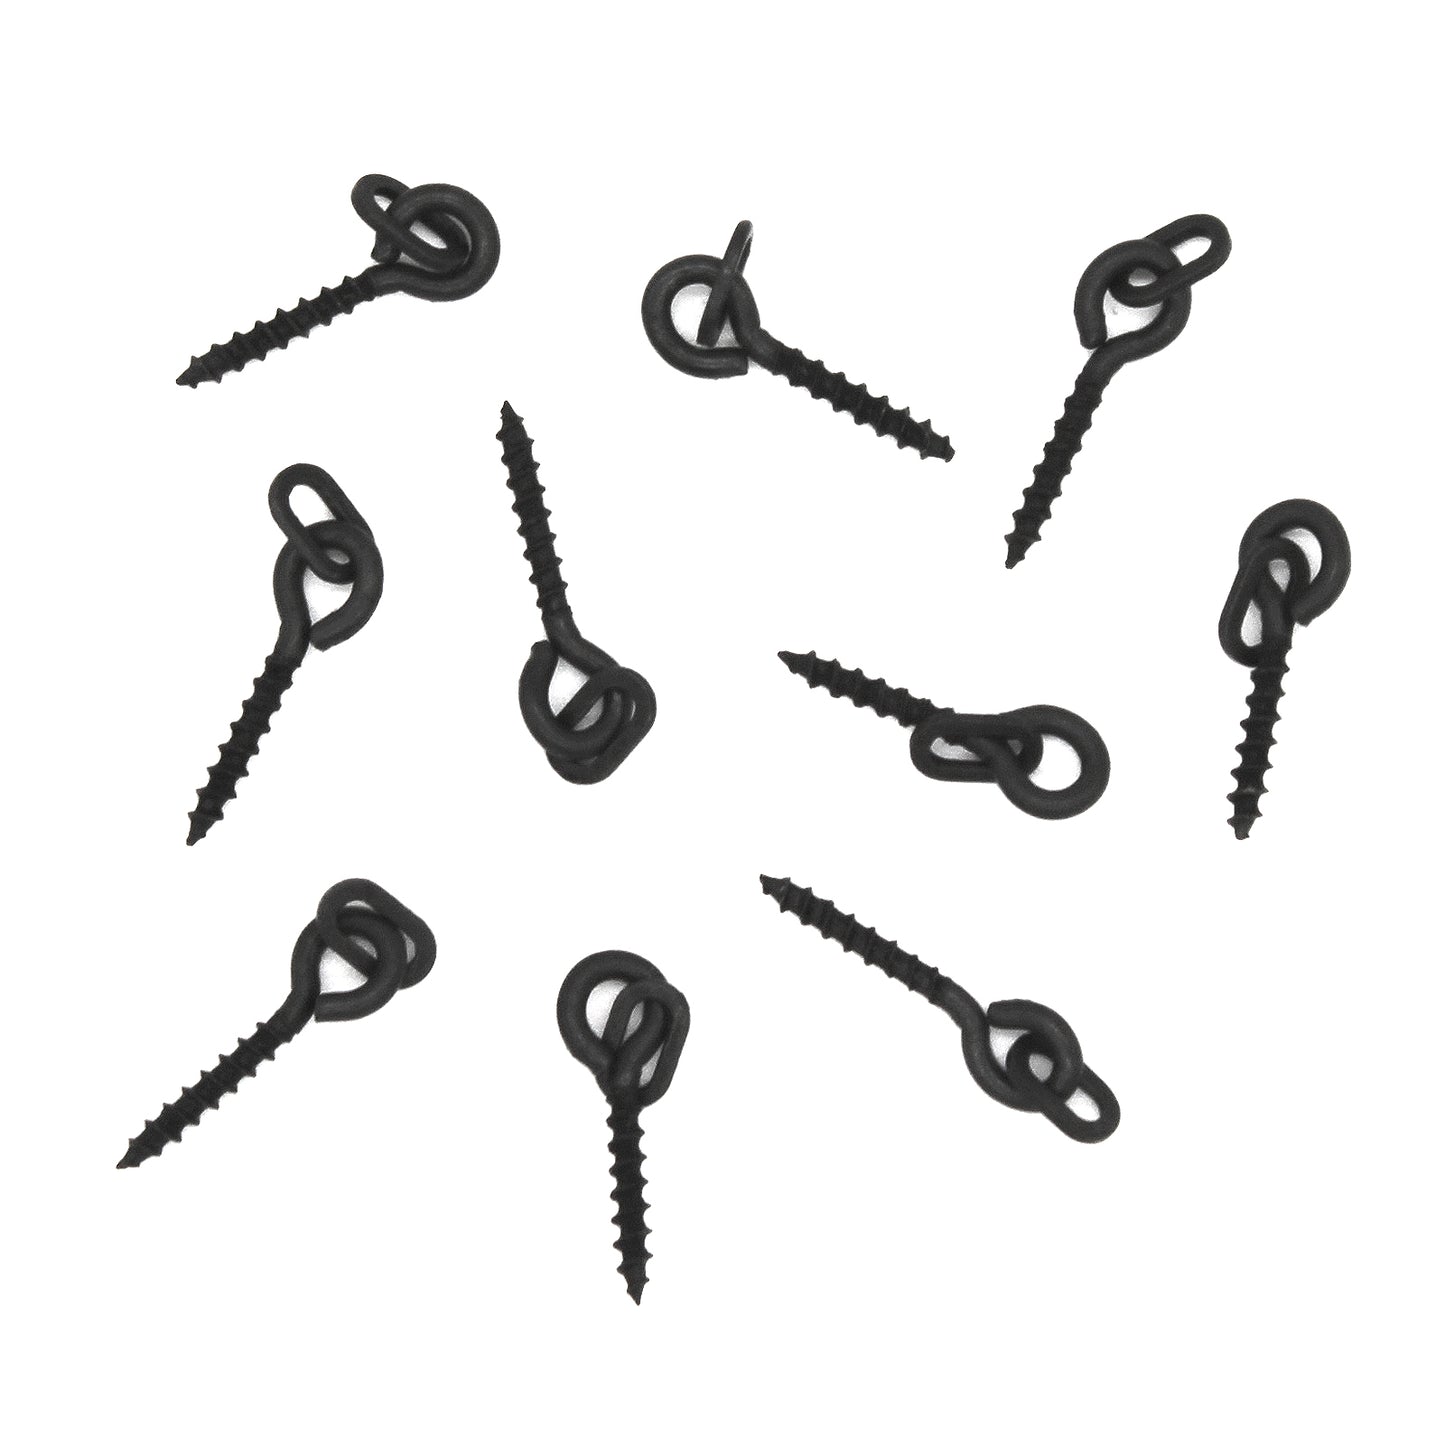 Deception Angling Bait Screws with Oval Ring for Fishing 10 Per Pack